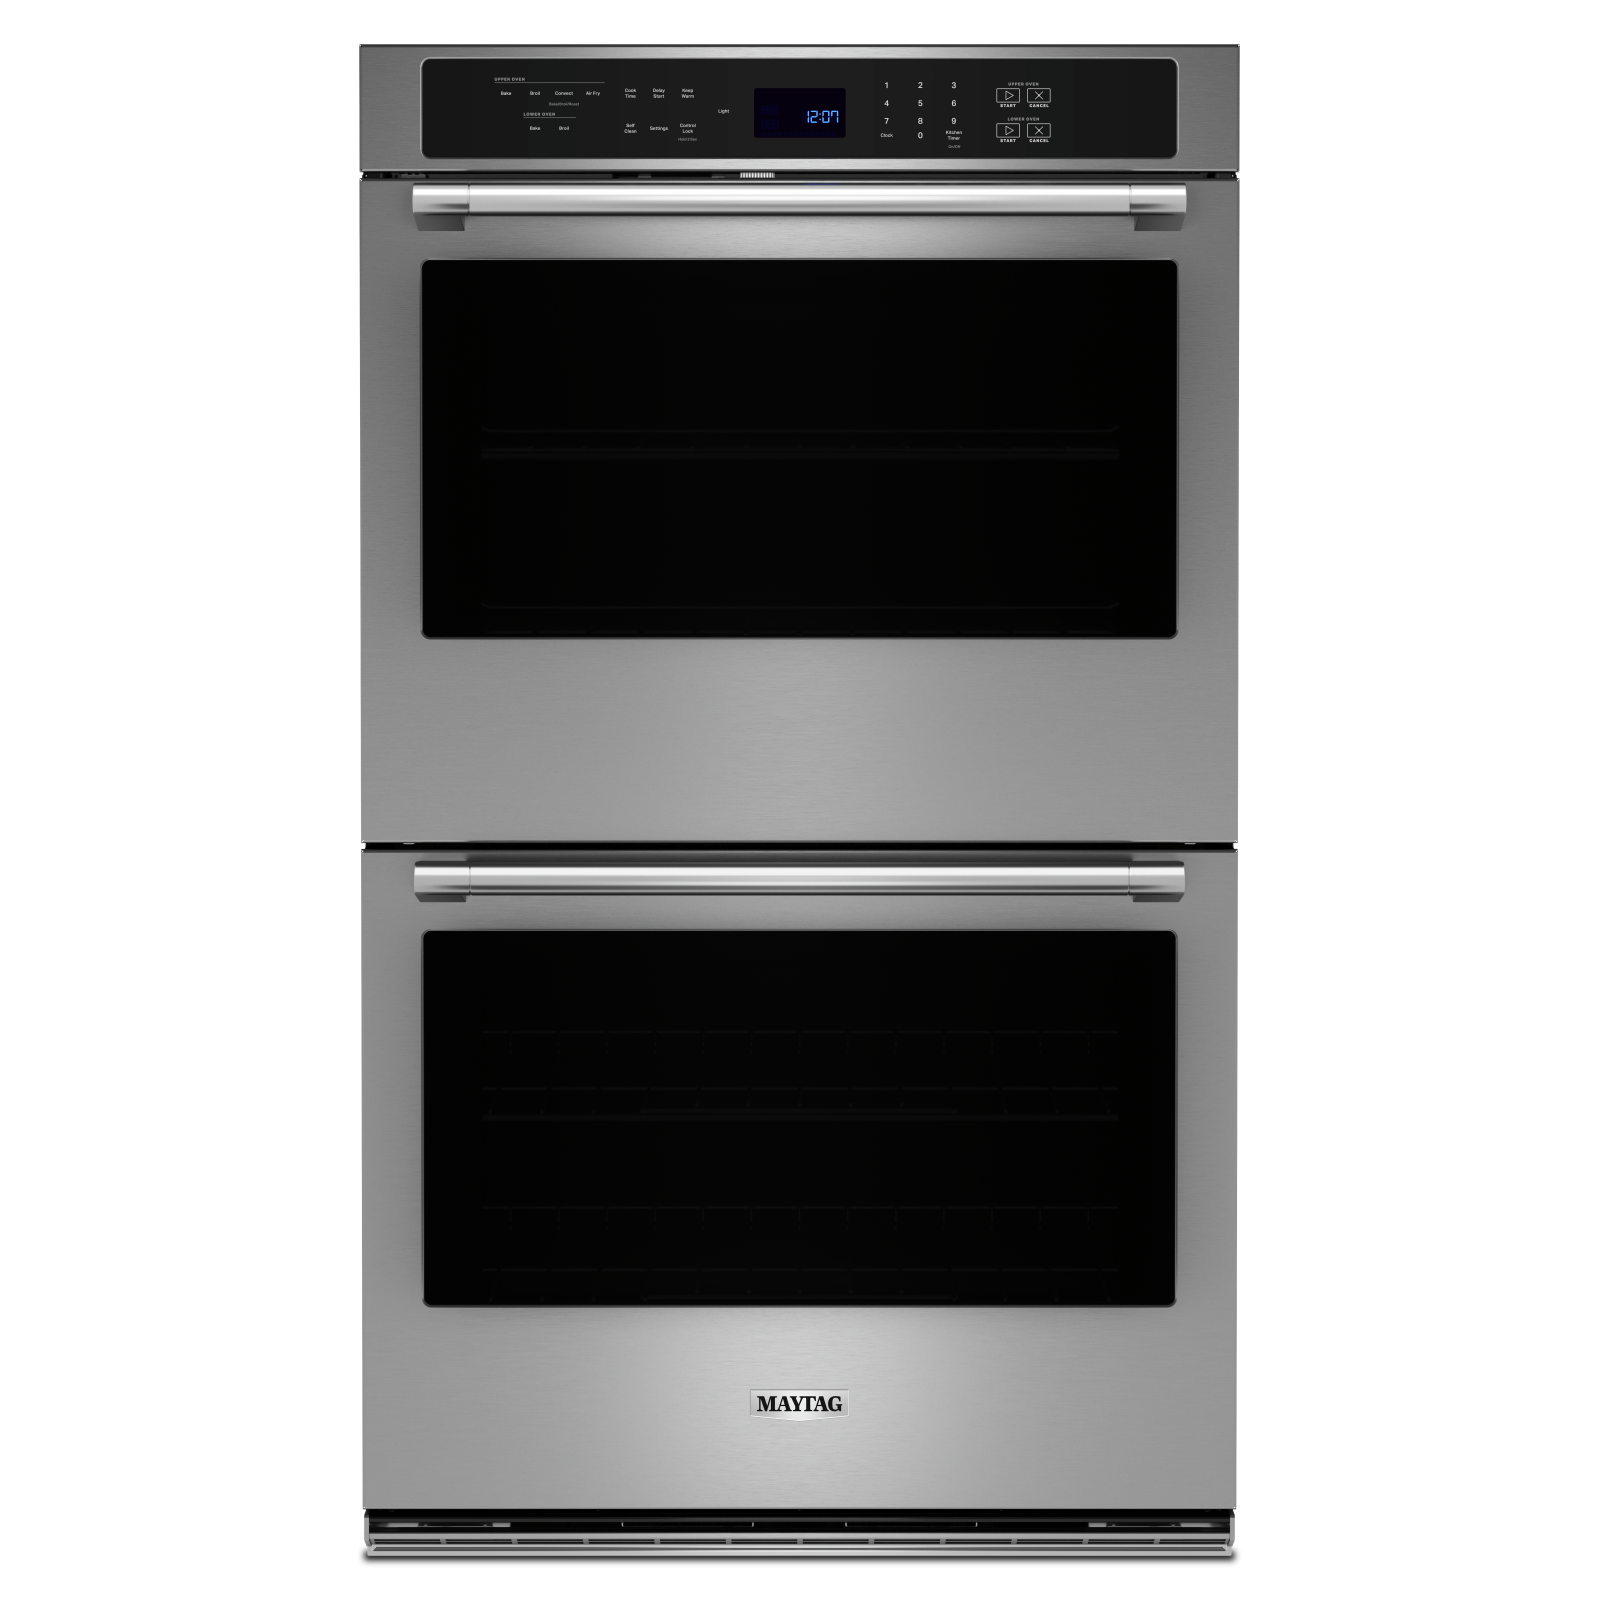 Maytag - 8.6 cu. ft Double Wall Oven in Stainless - MOED6027LZ